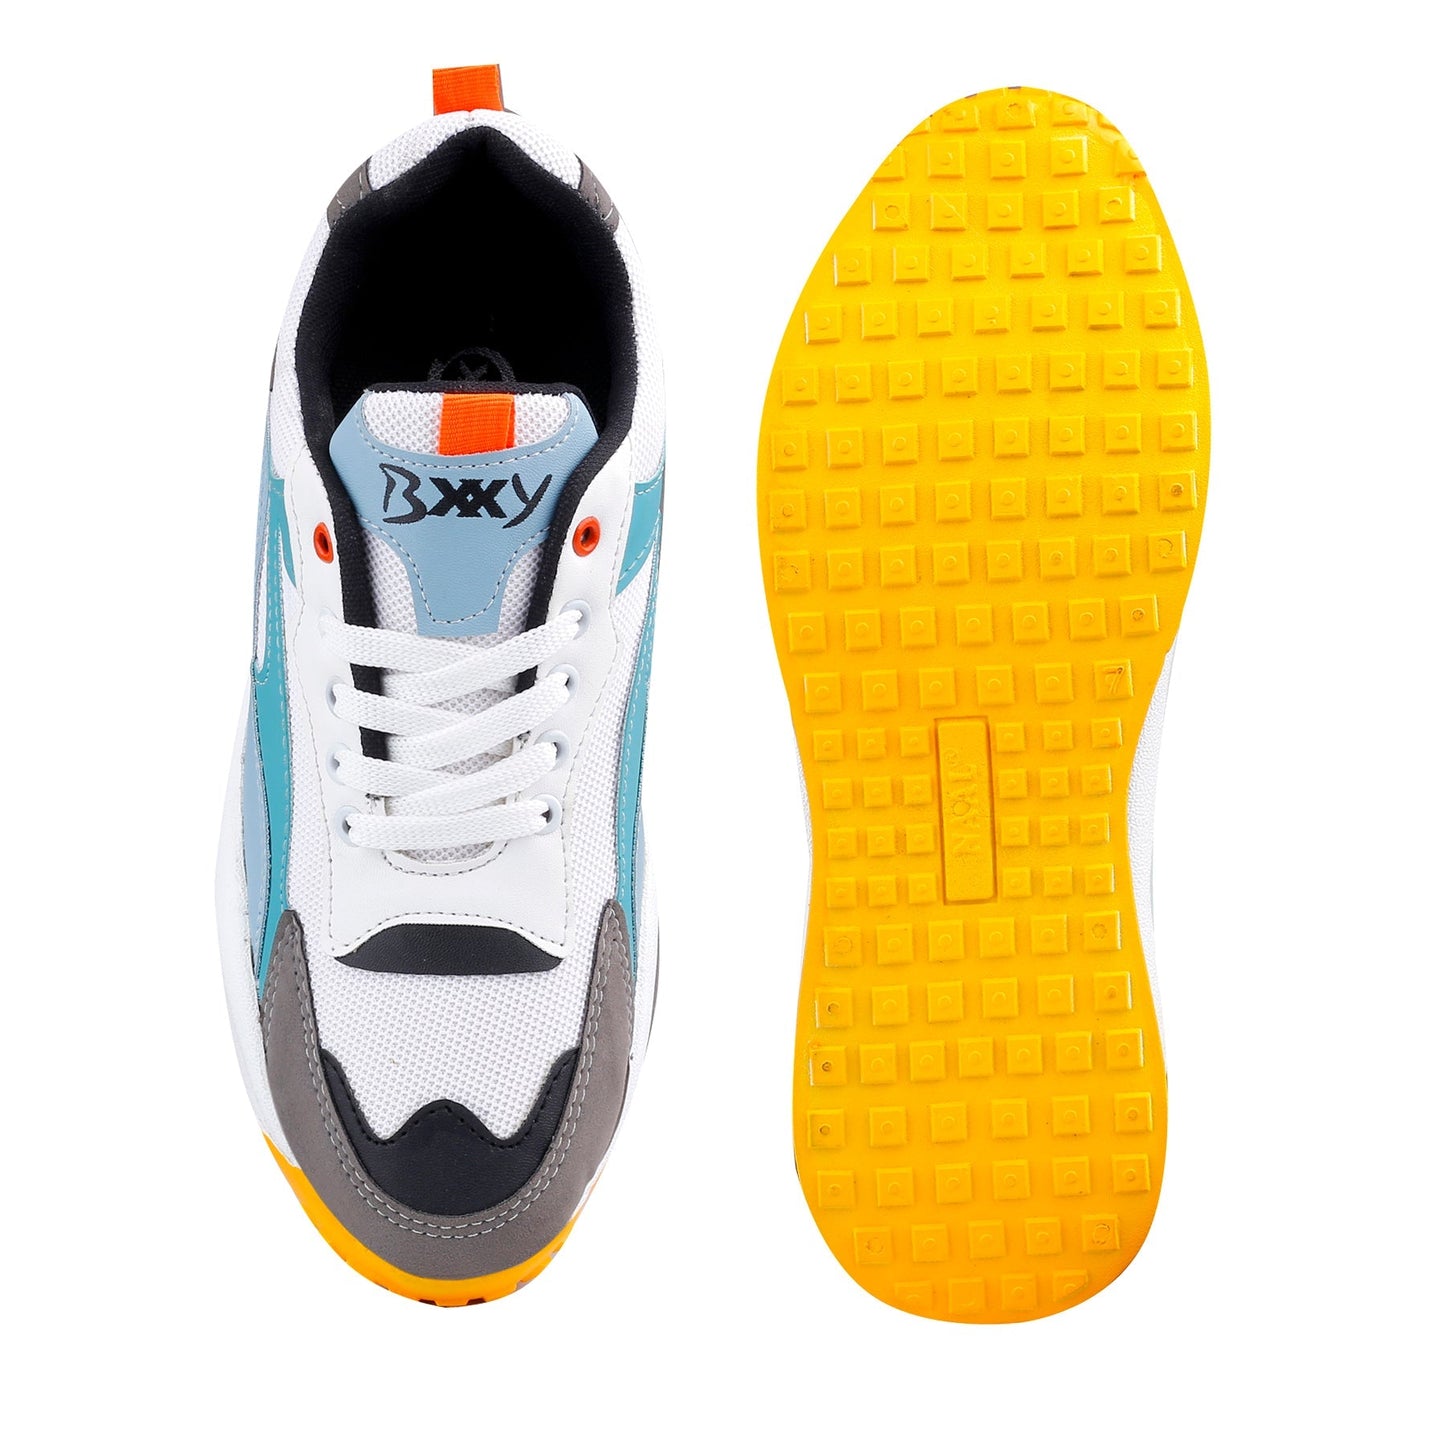 Men's New Stylish Breathable Lace-up Sports Shoes